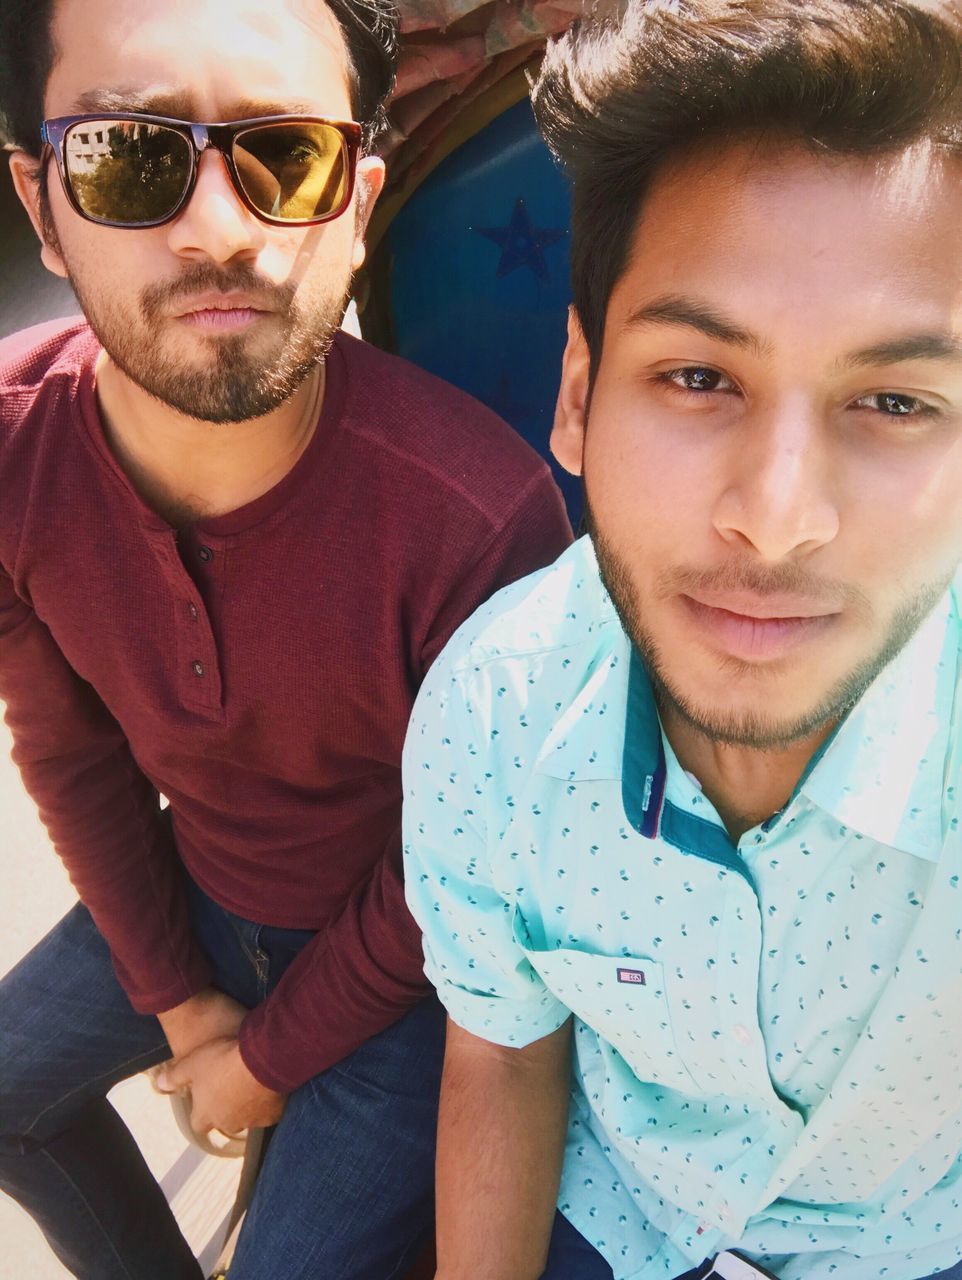 two people, young adult, men, males, young men, sunglasses, togetherness, couple - relationship, adult, adults only, beautiful people, casual clothing, handsome, lifestyles, people, couple, portrait, only men, beard, bonding, modern, real people, smiling, outdoors, day